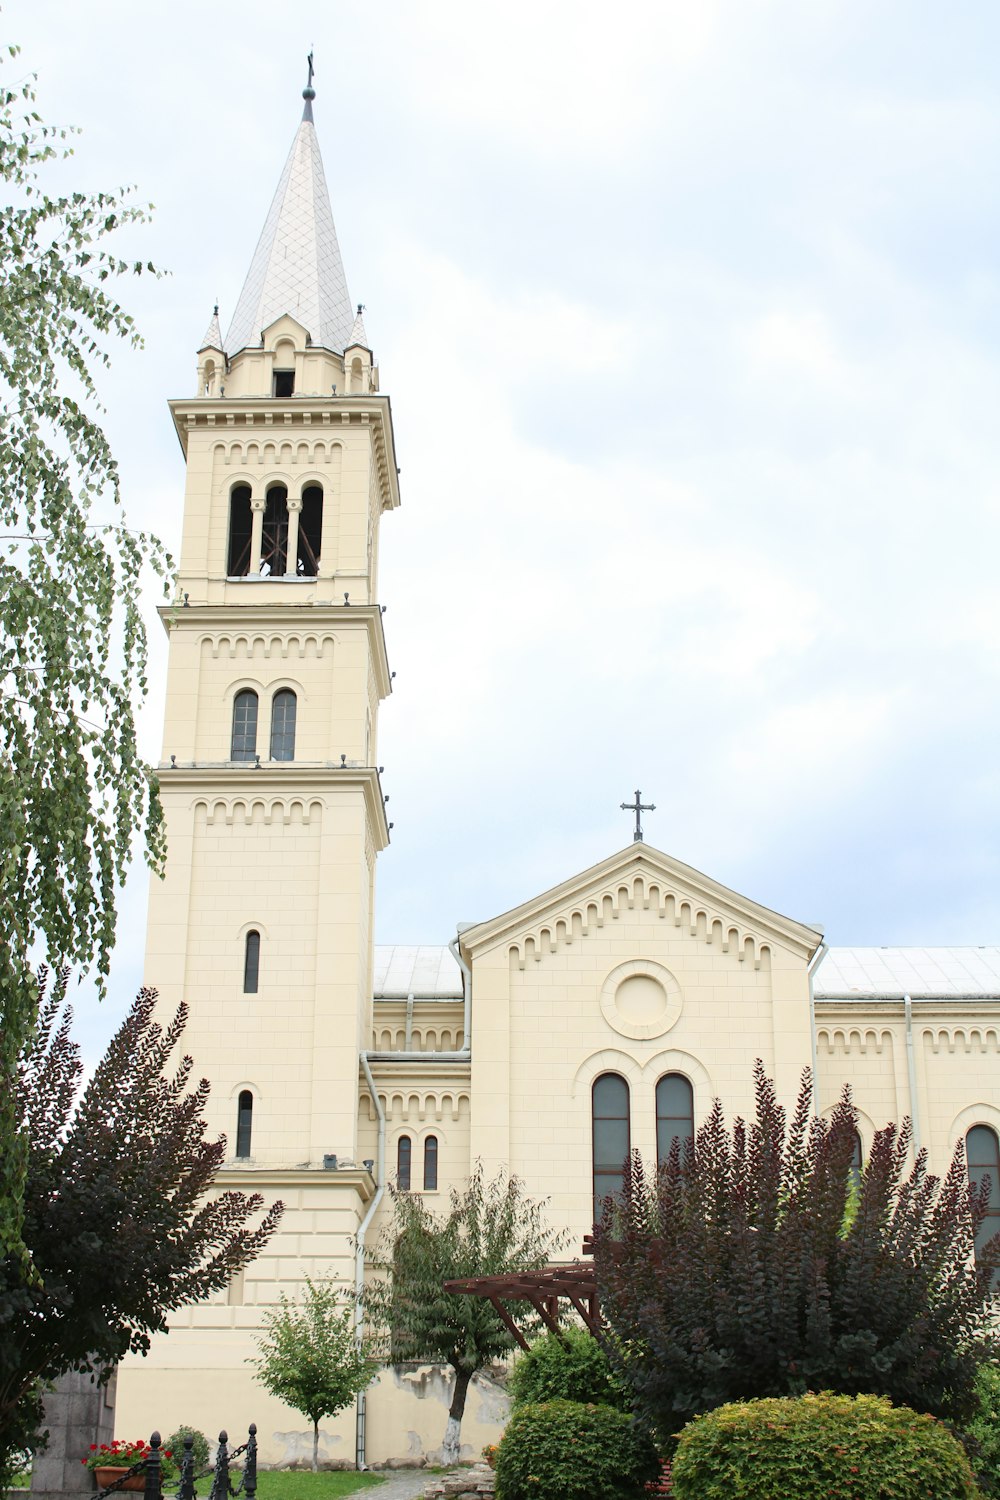 a church with a tall tower